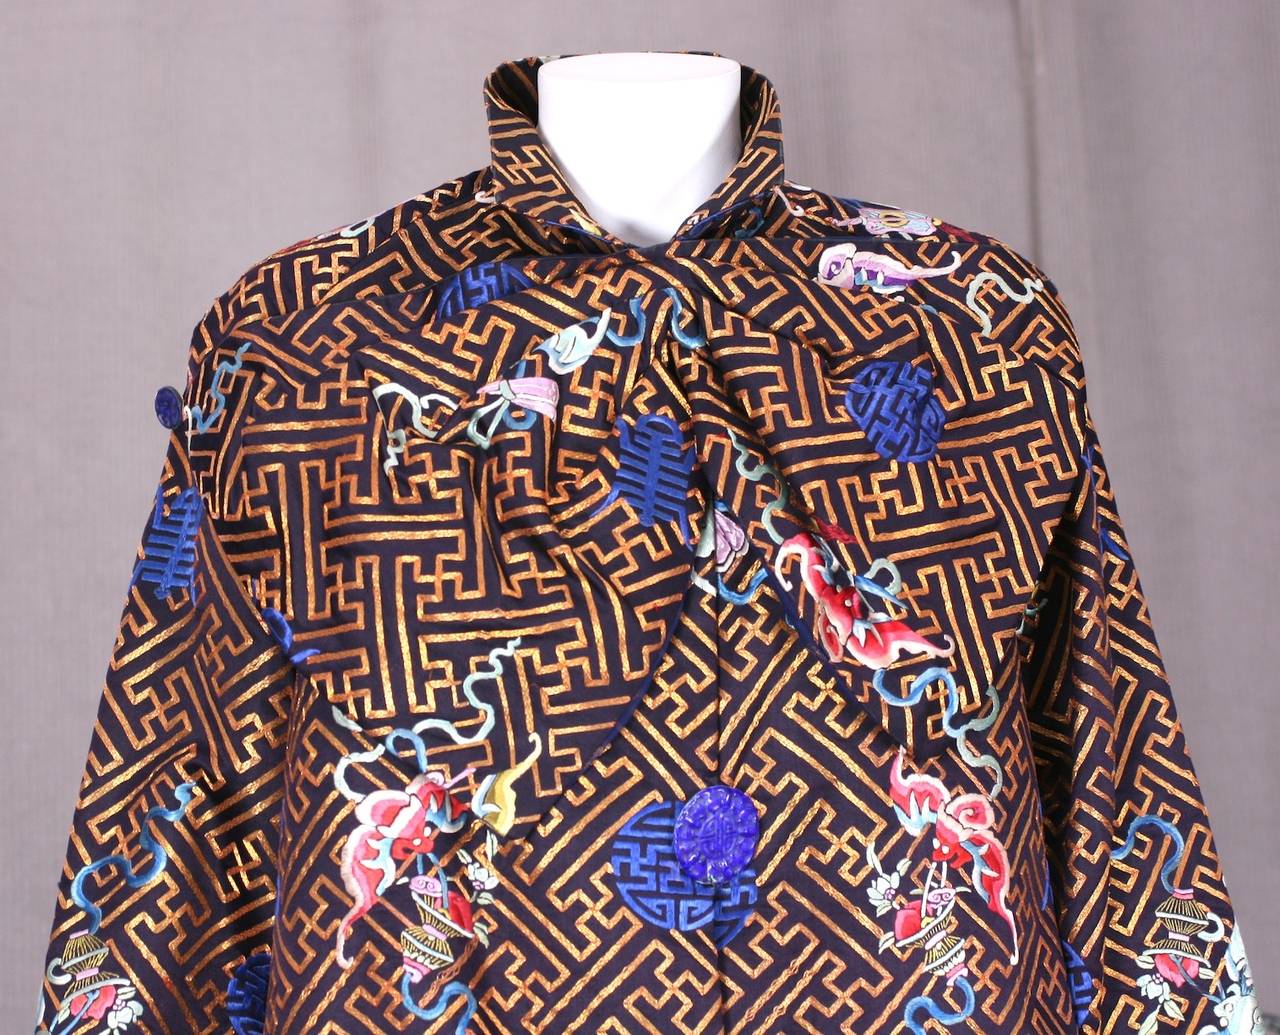 Art Deco coat from the 1930's retailed in Peking (Beijing), China. A lavish antique Chinese textile is used to construct the coat with an easy, wearable cut.
There are 2 large blue enameled buttons on the center front and a large gathered bow is